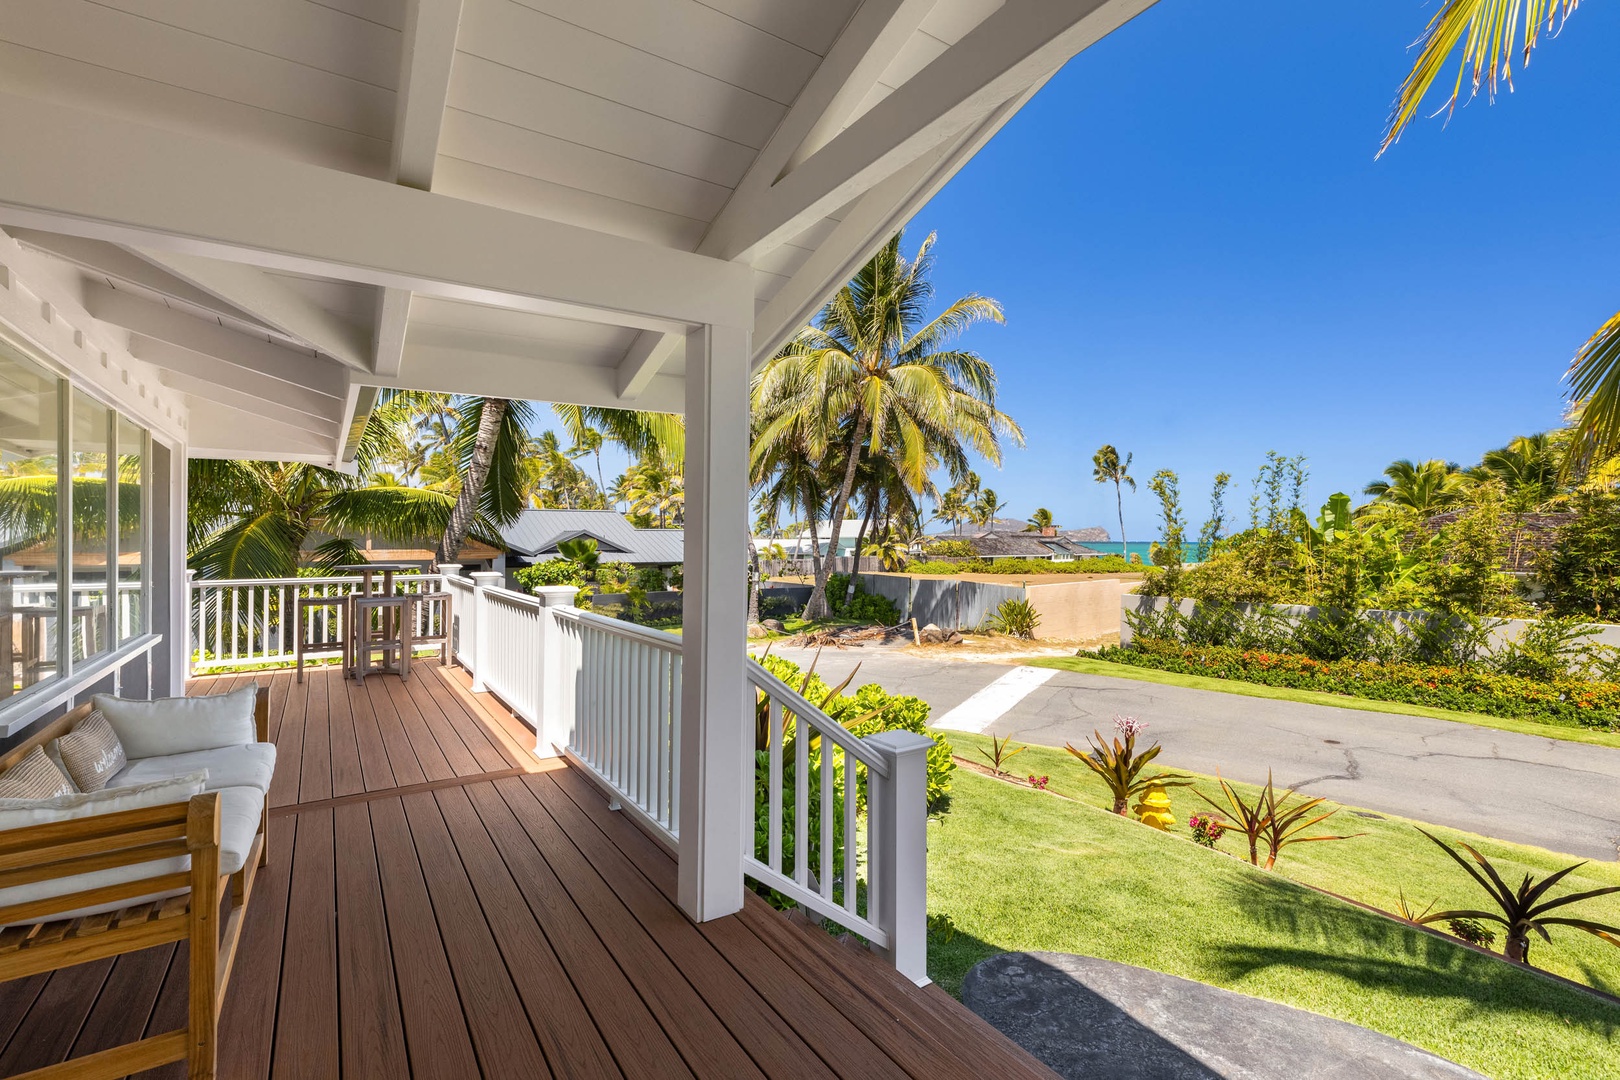 Kailua Vacation Rentals, Seahorse Beach House - Breathe in the fresh air and scenic views from our expansive wrap-around deck